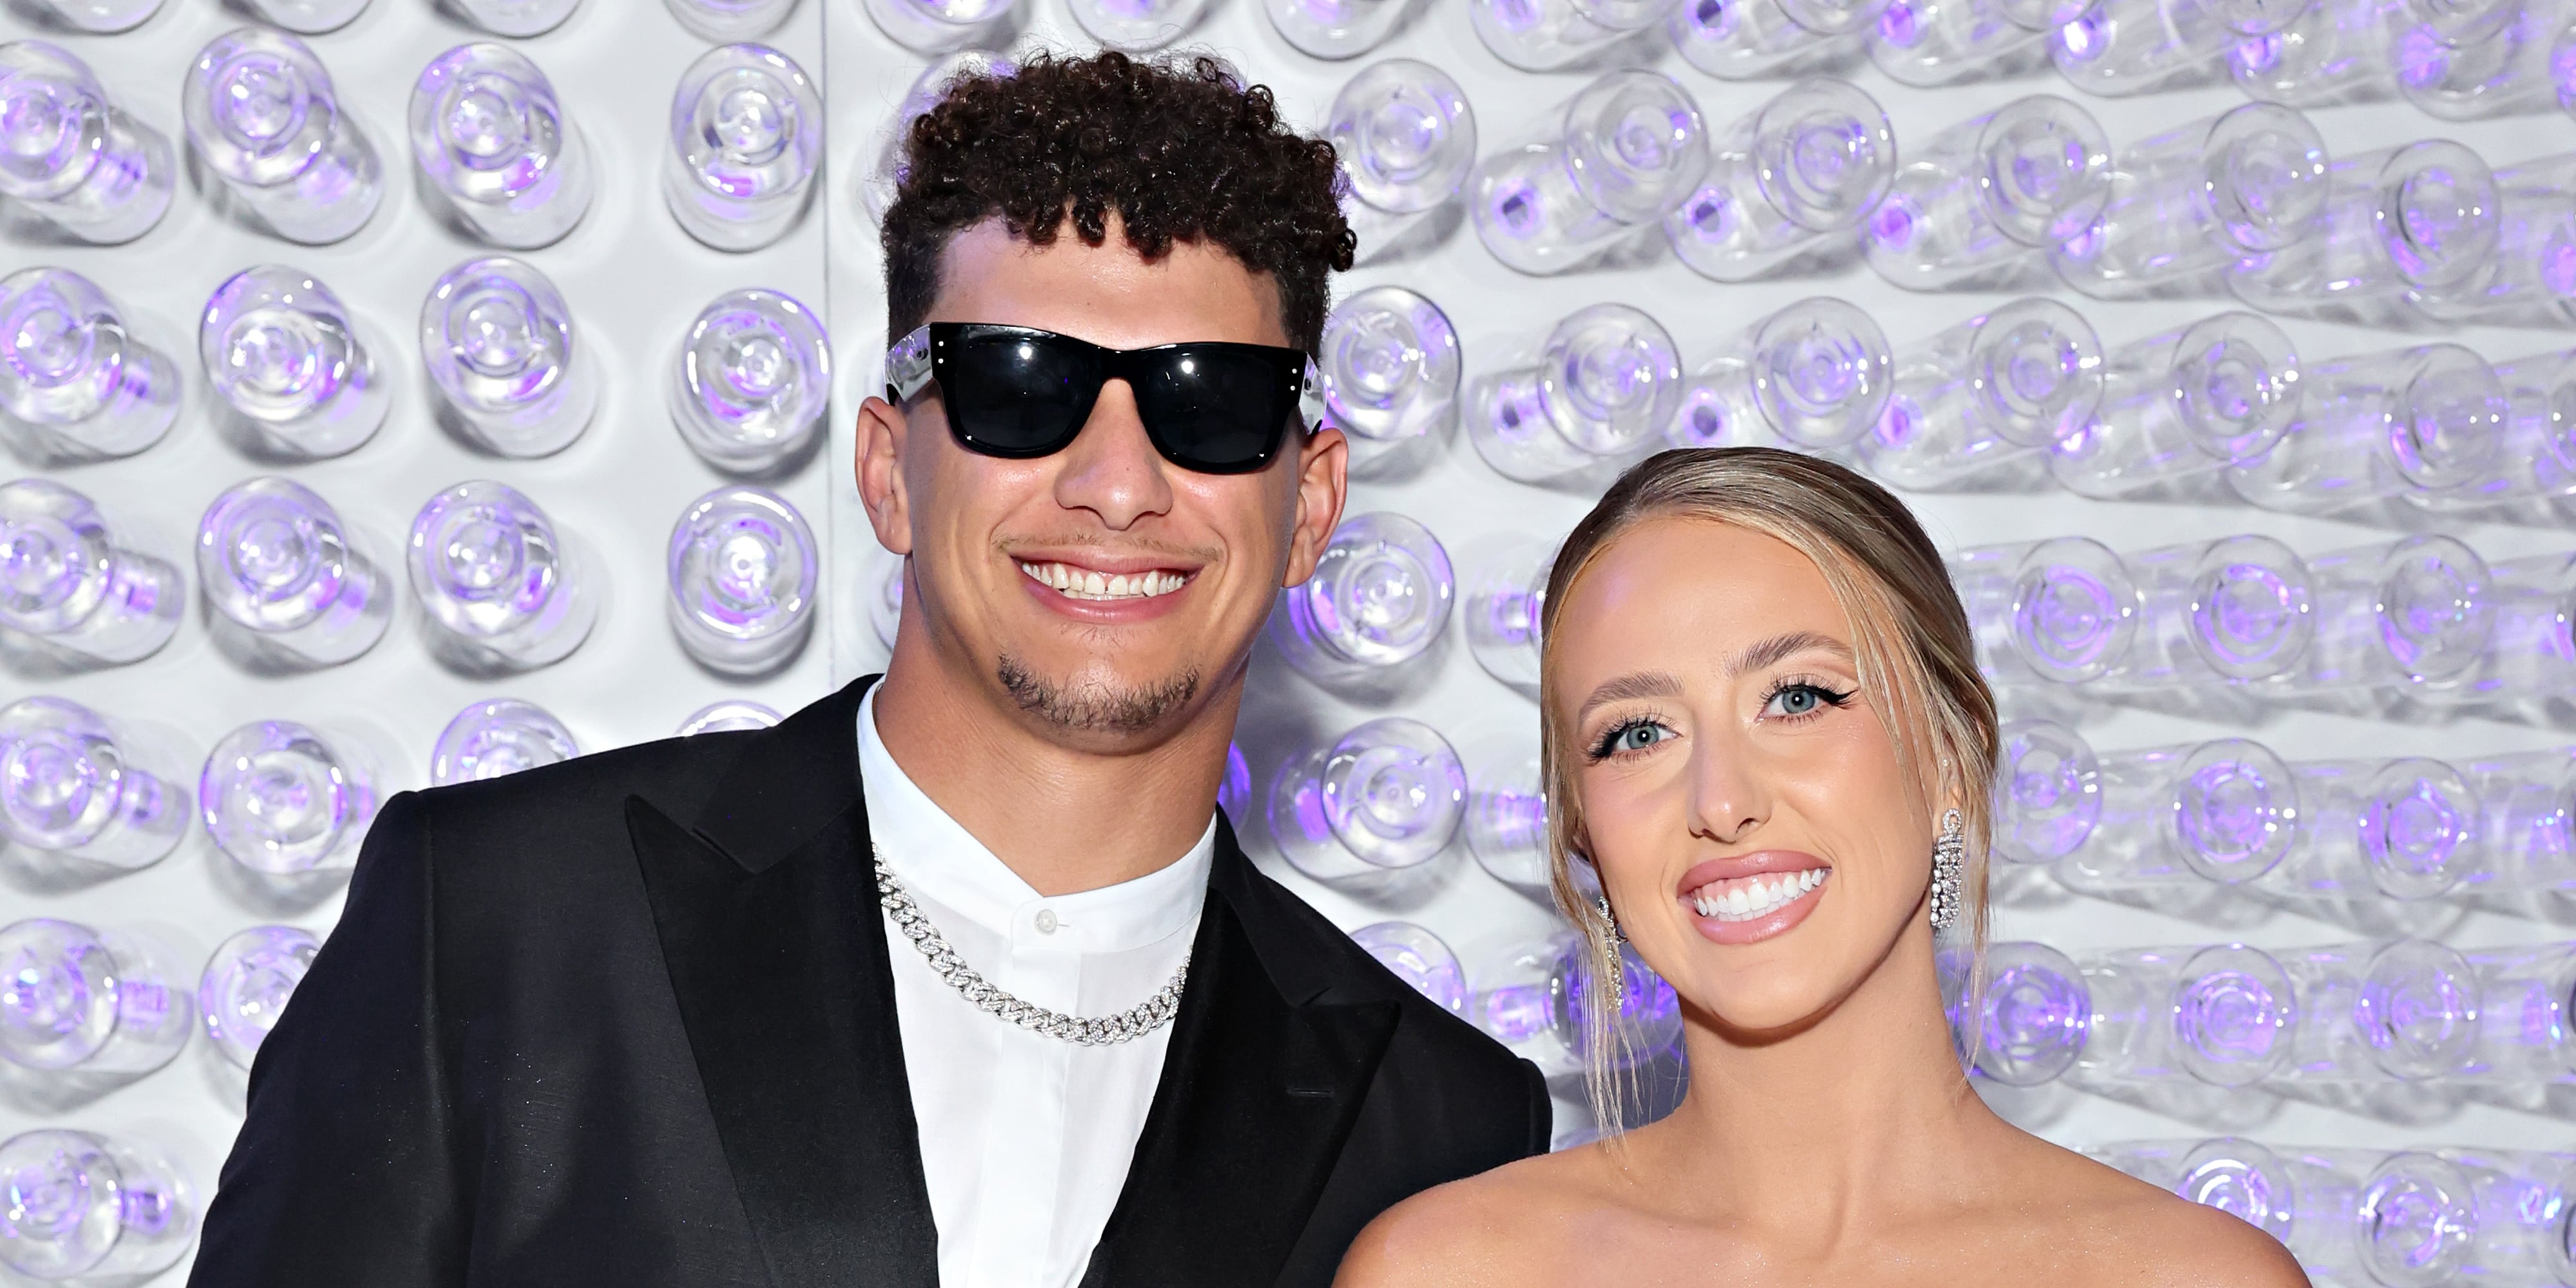 Patrick Mahomes and his fiancee reveal baby's sex in sweet reveal